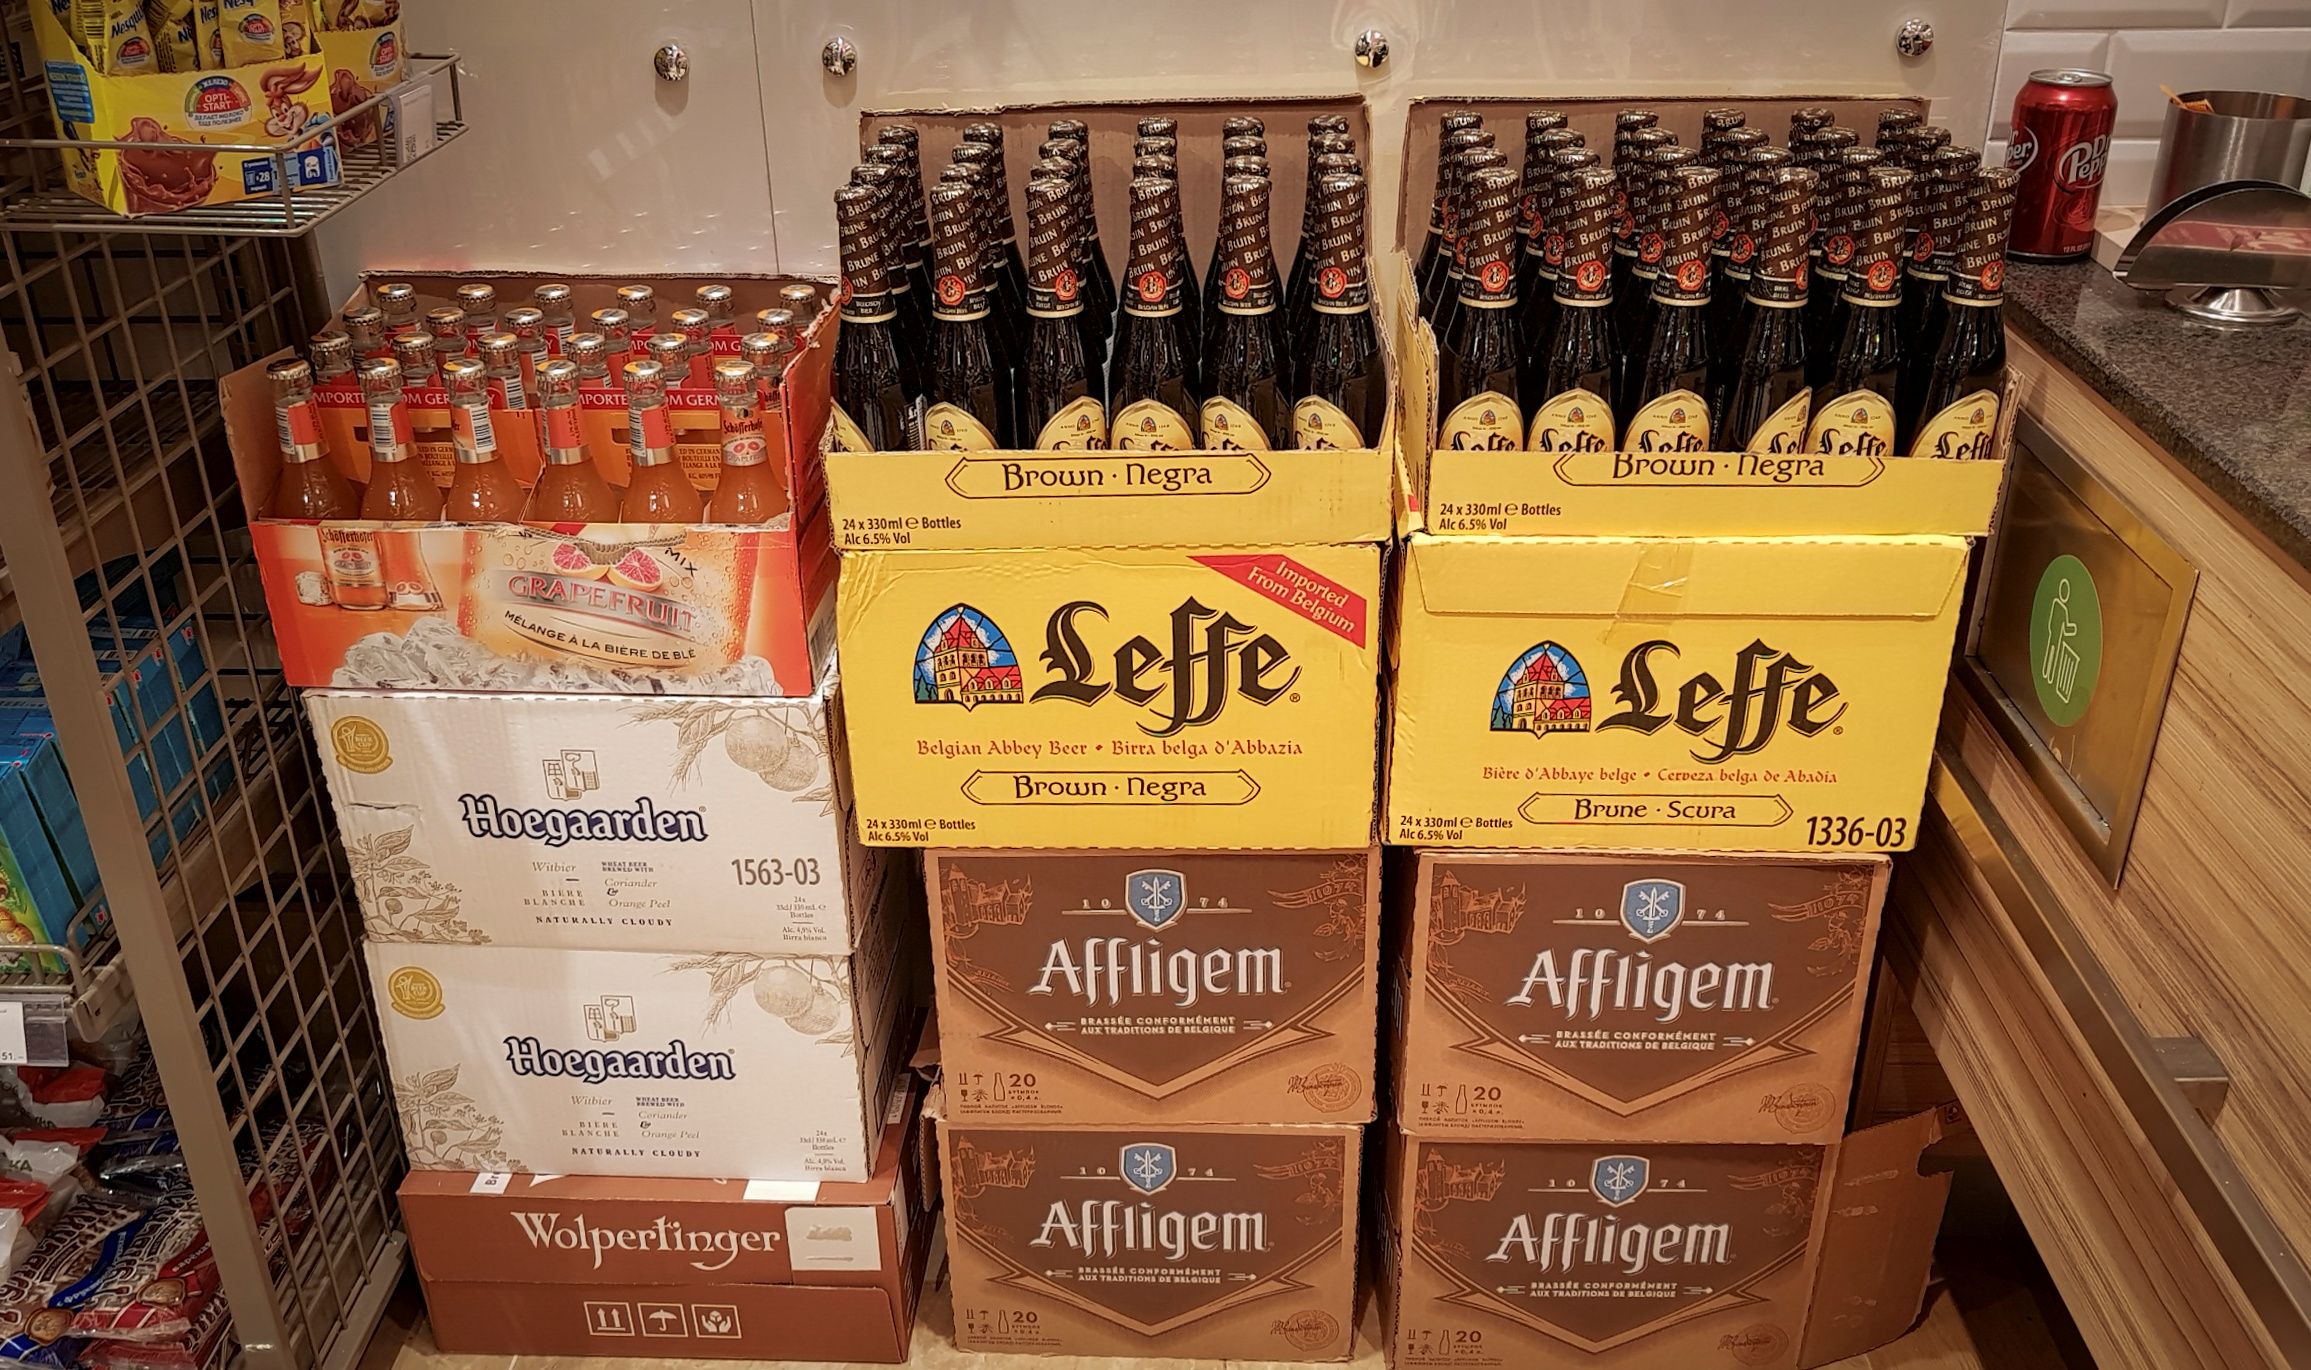 Boxes with bottles of beer are seen in a shop in Moscow